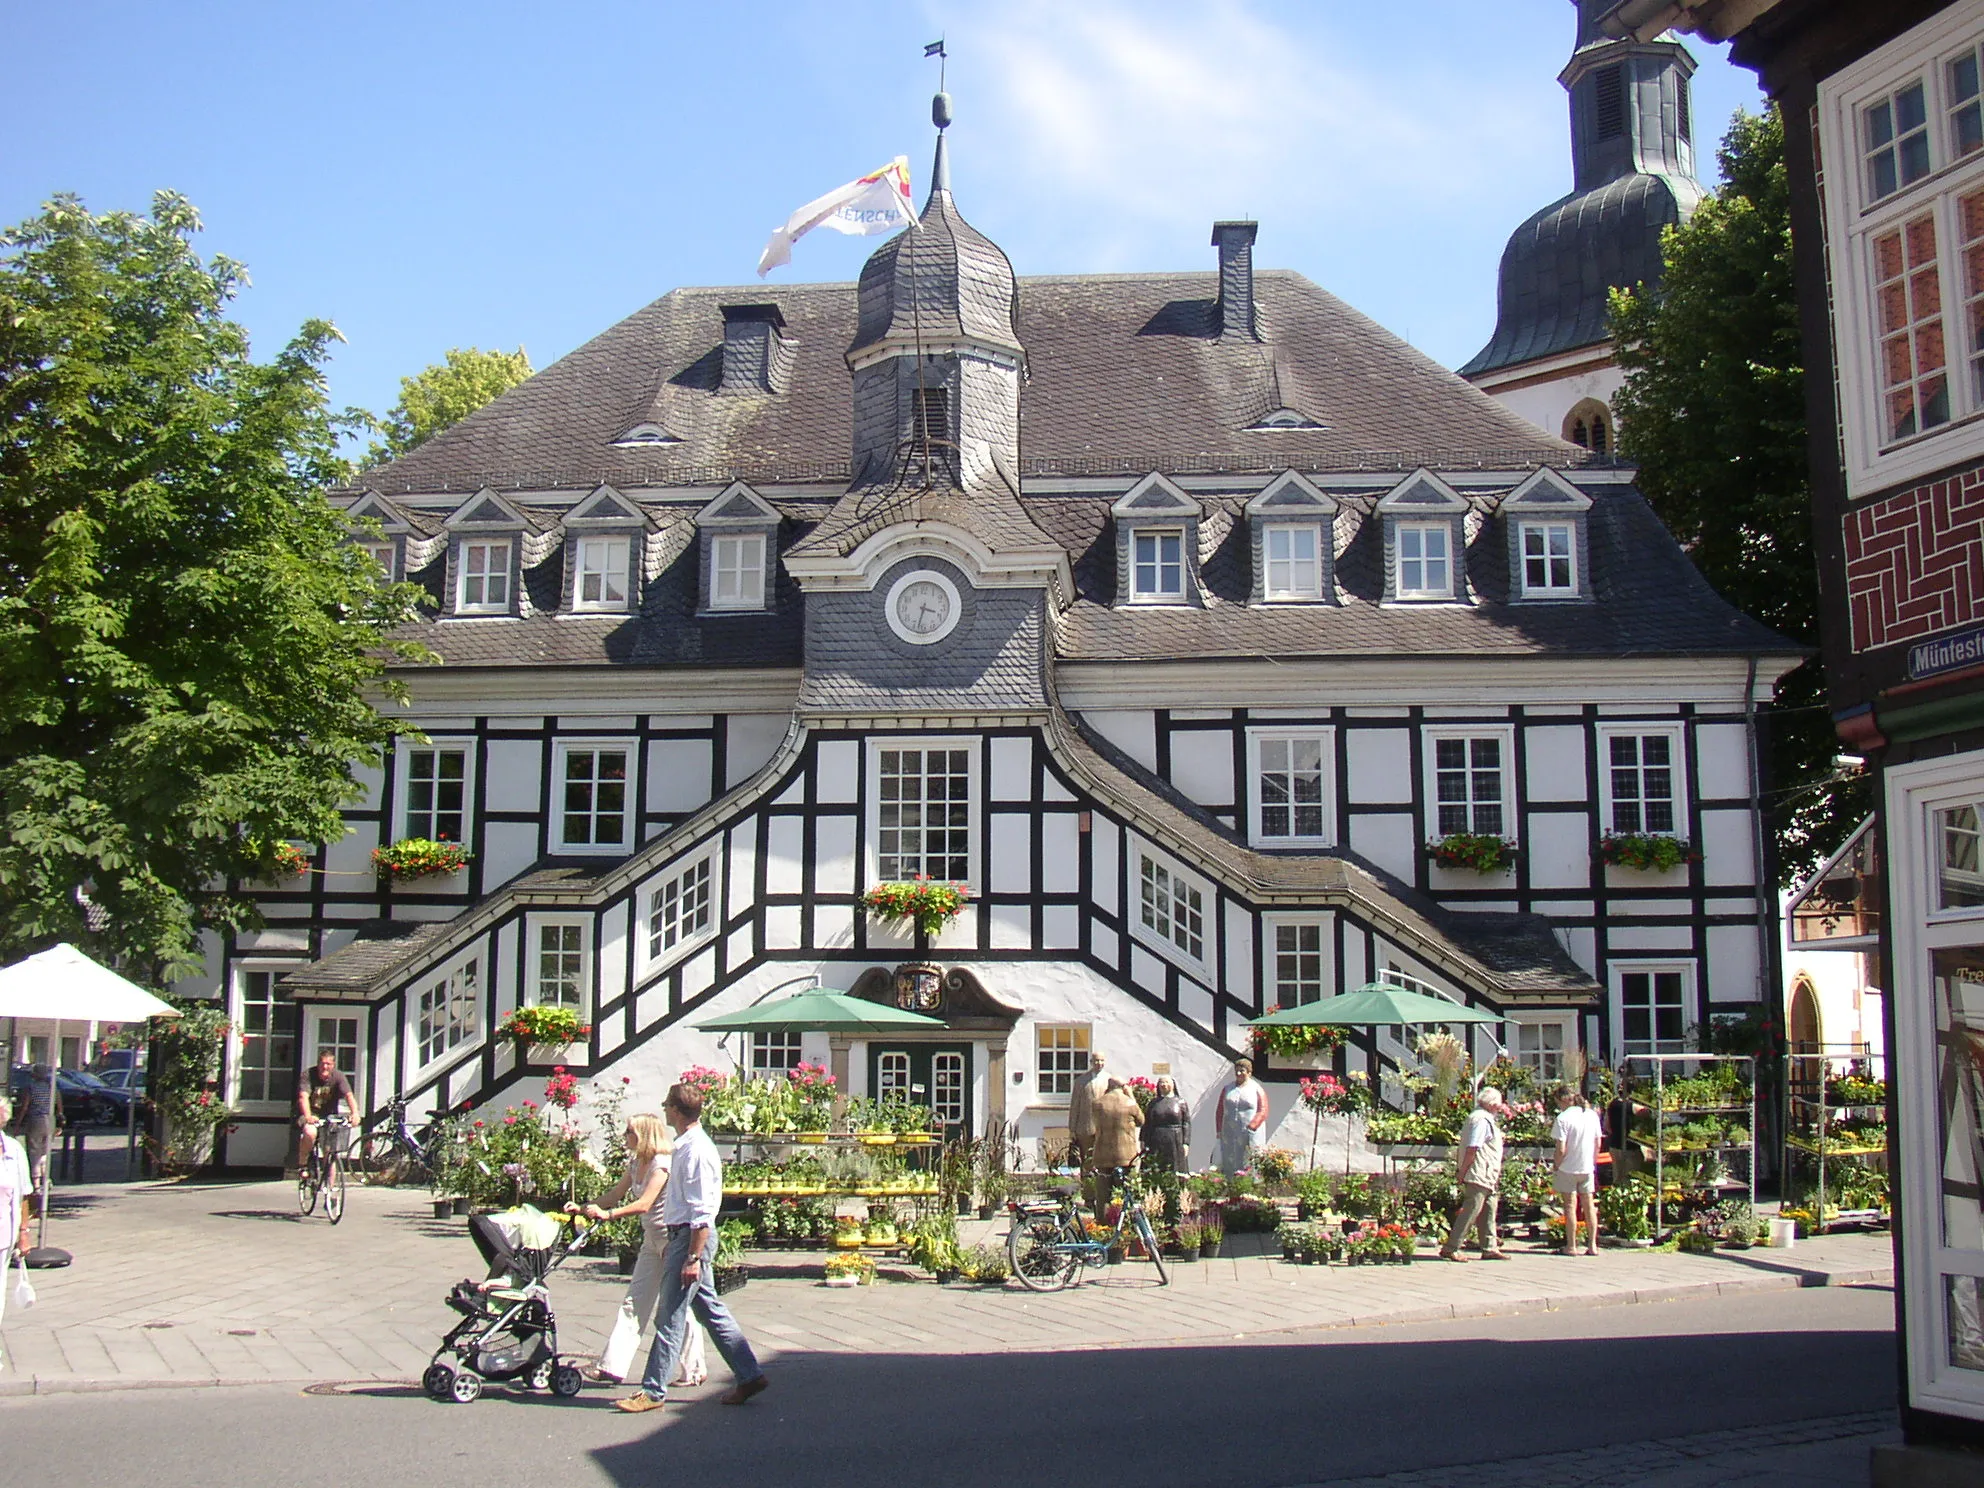 Photo showing: Historic town hall of Rietberg, District of Gütersloh, North Rhine-Westphalia, Germany.